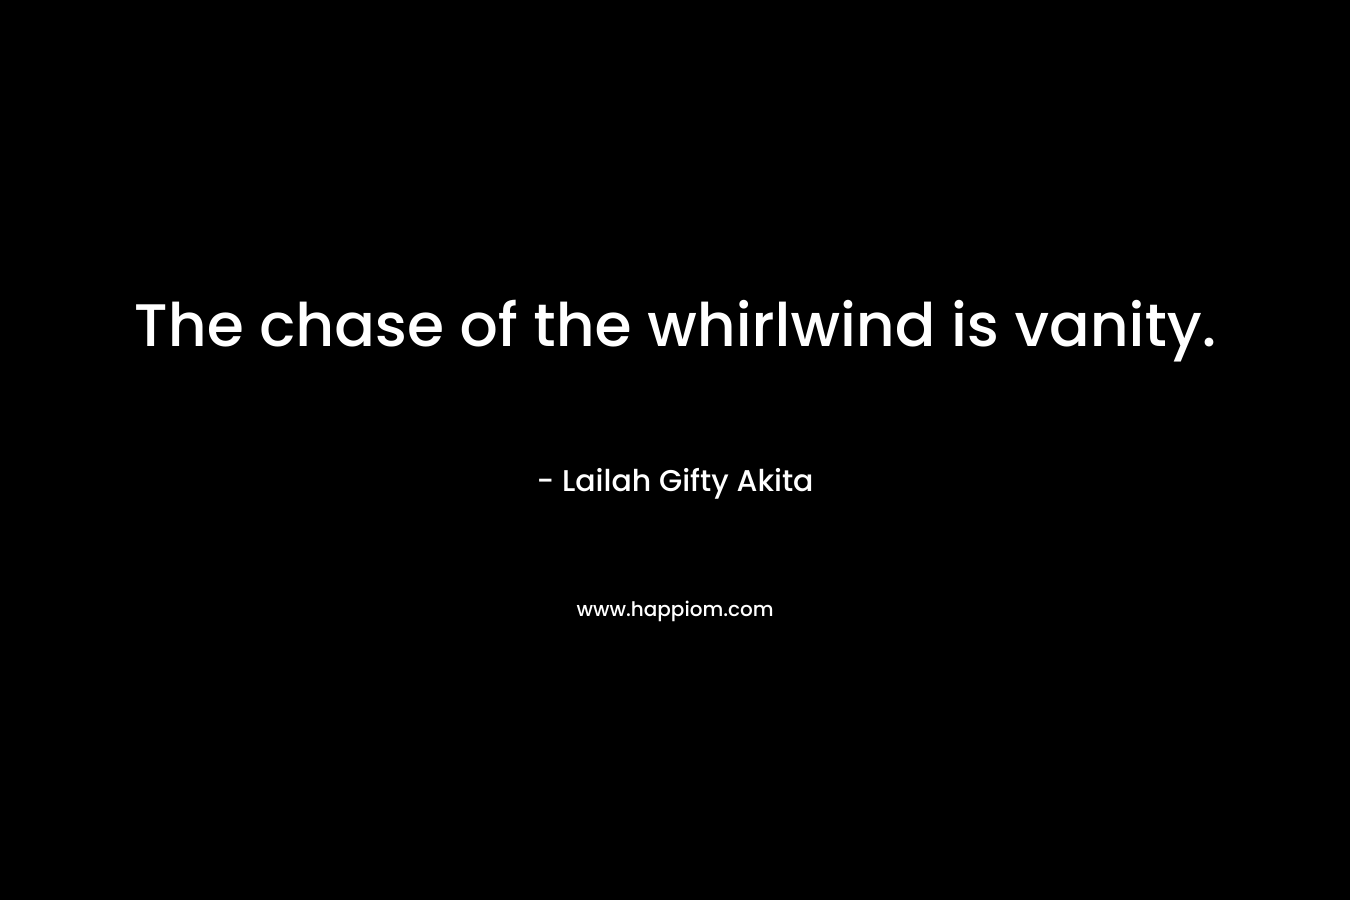 The chase of the whirlwind is vanity. – Lailah Gifty Akita